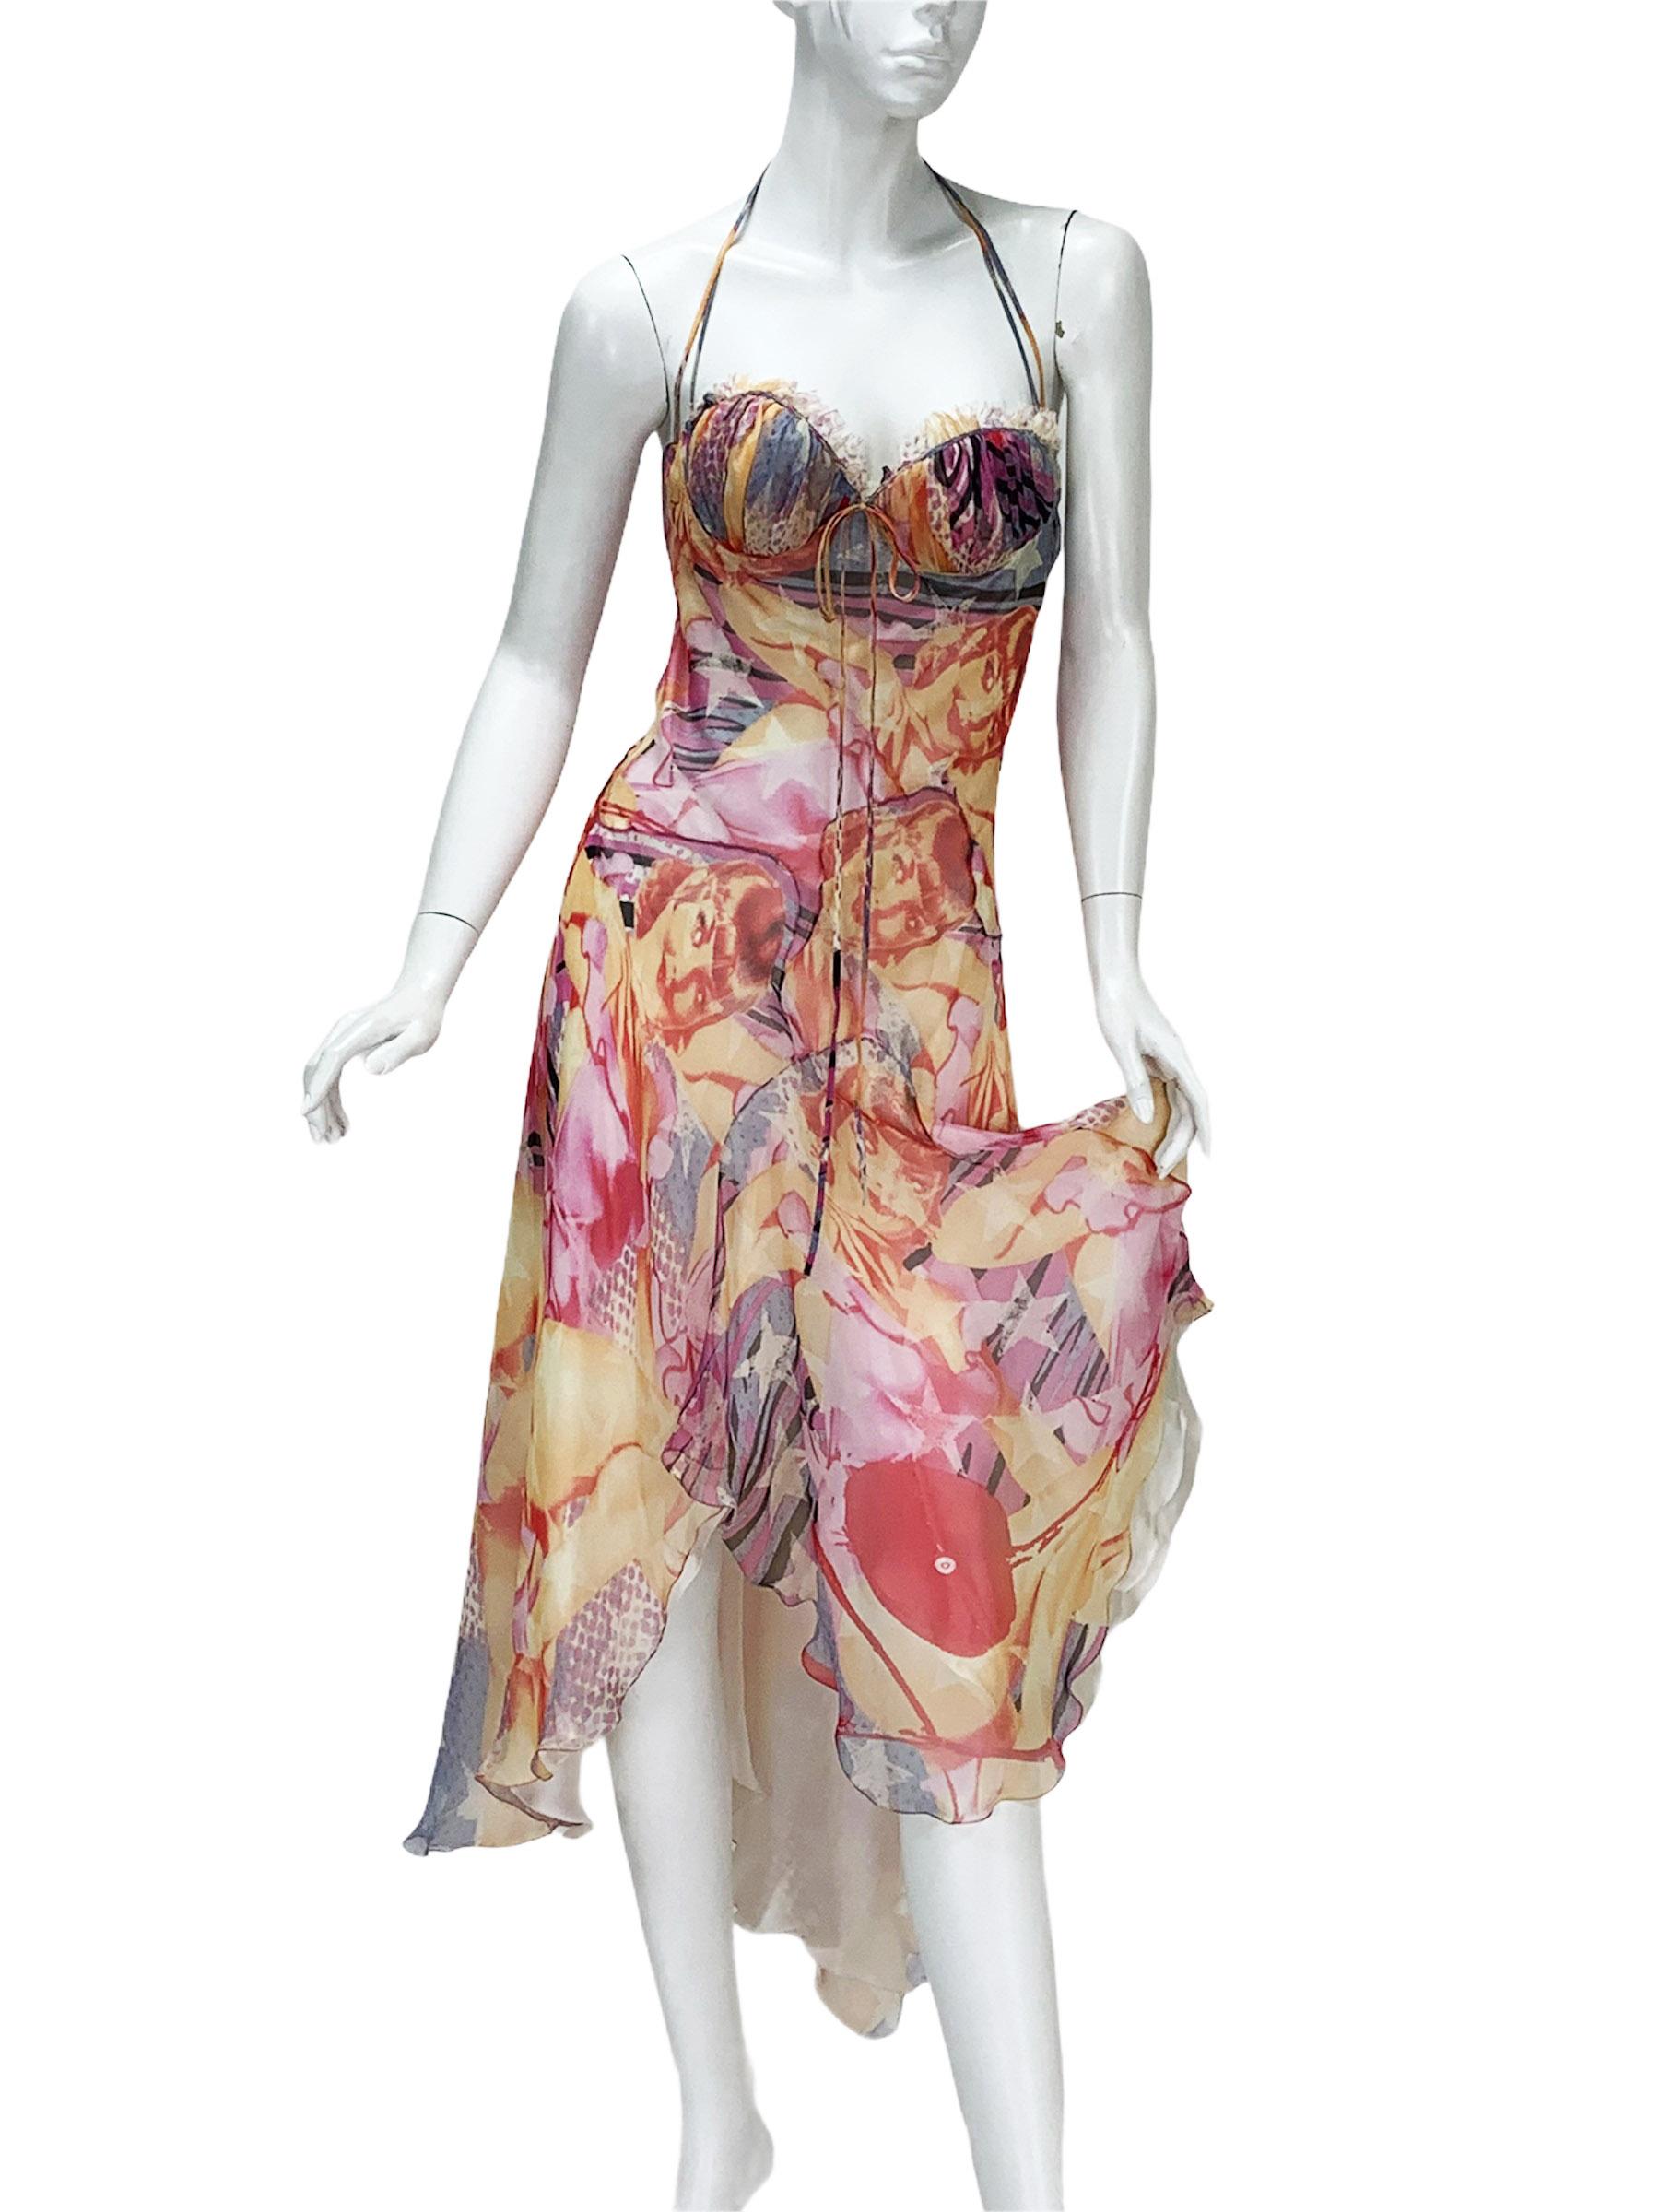 Alexander McQueen Silk Halter High-Low Unique Printed Dress
2003 Collection
Designer size - 38
92% Silk, 6% Nylon, 2% Spandex.
Unique Print, High-Low Style, Slip-On ( no zipper ), Build-in Cups, Bow-accent, Fully Lined.
Excellent Vintage